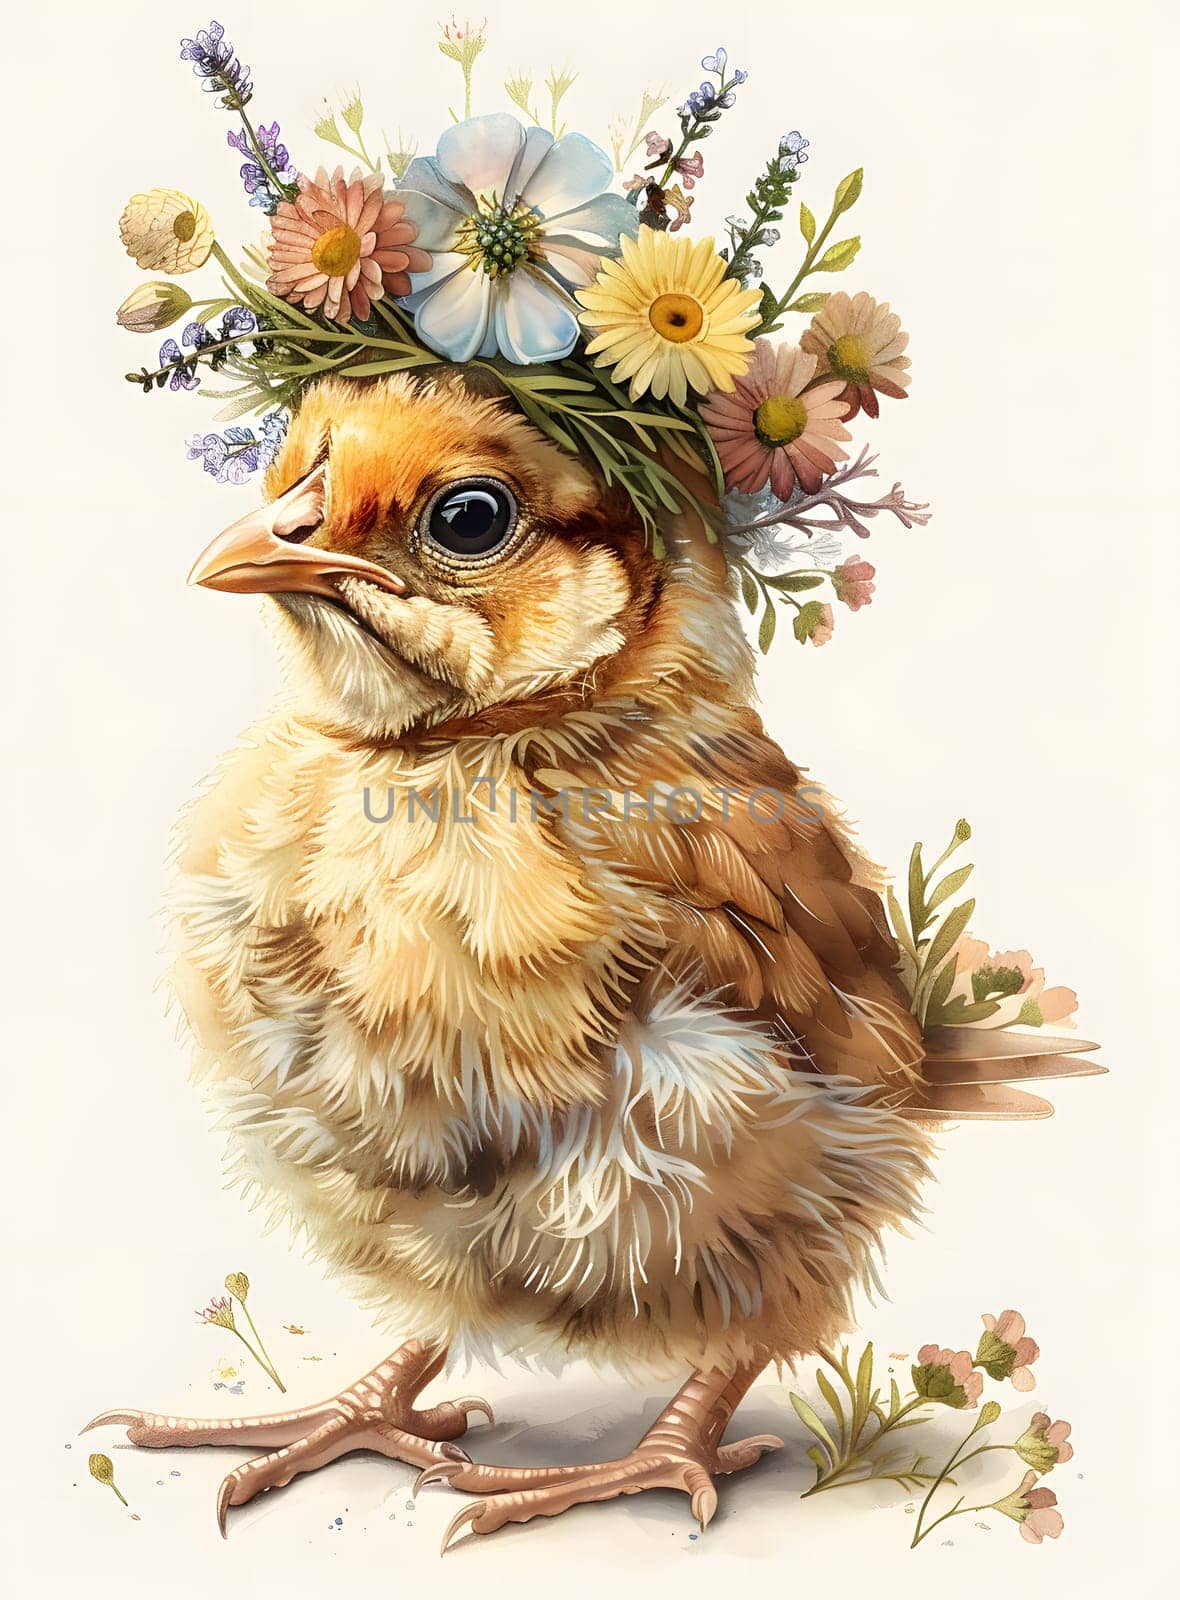 A tiny Finch chick adorned with a delicate flower crown perched on a branch, a masterpiece of natures painting and artistry